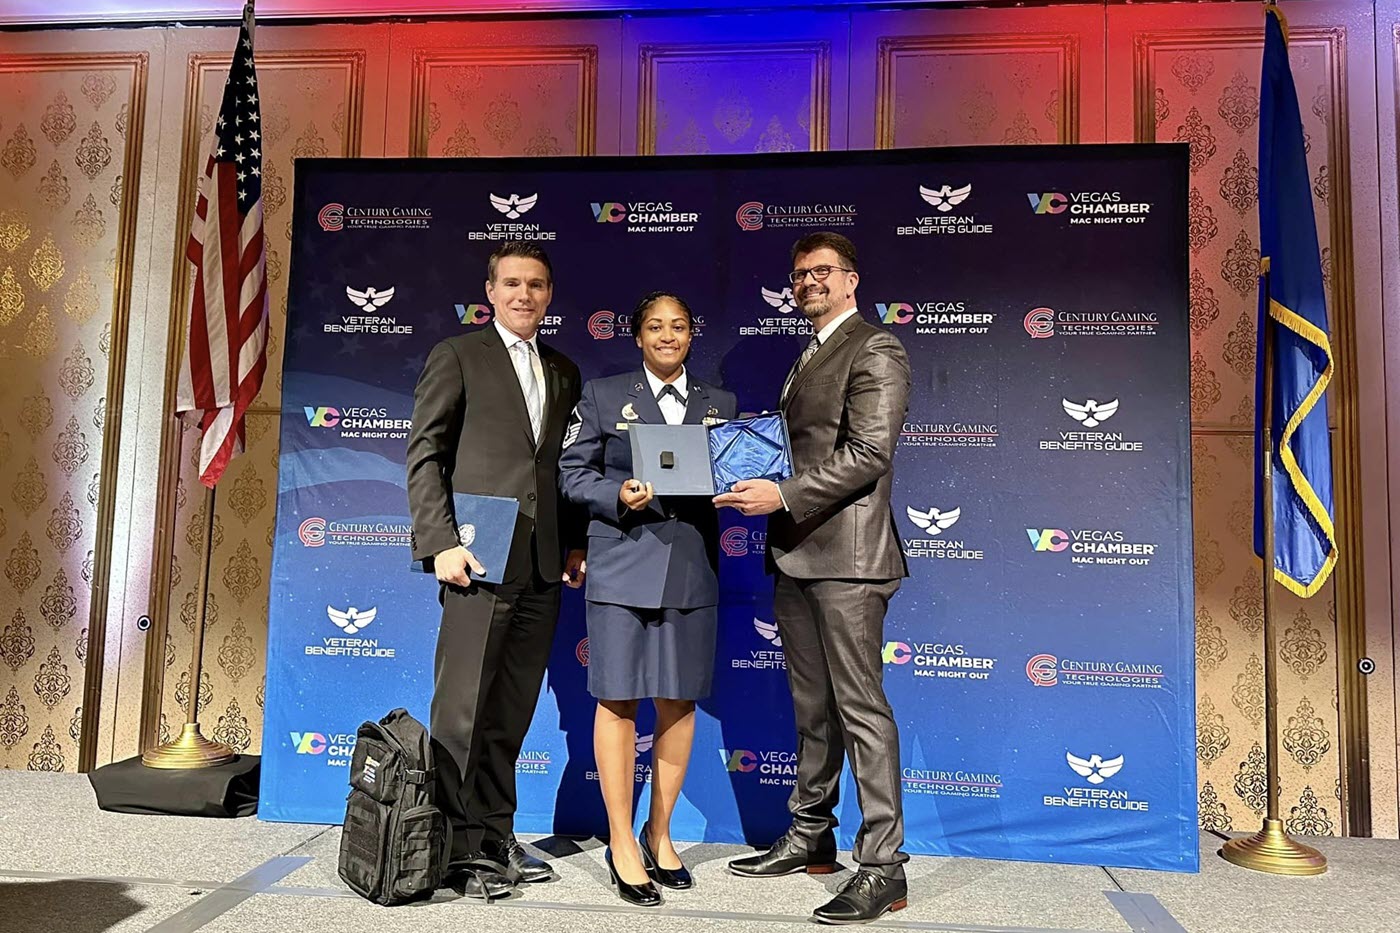 man on left in black suit, woman in center in Air Force dress blues, and man on right in dark gray suit holding glass award on stage in front of flags and backdrop during awards ceremony